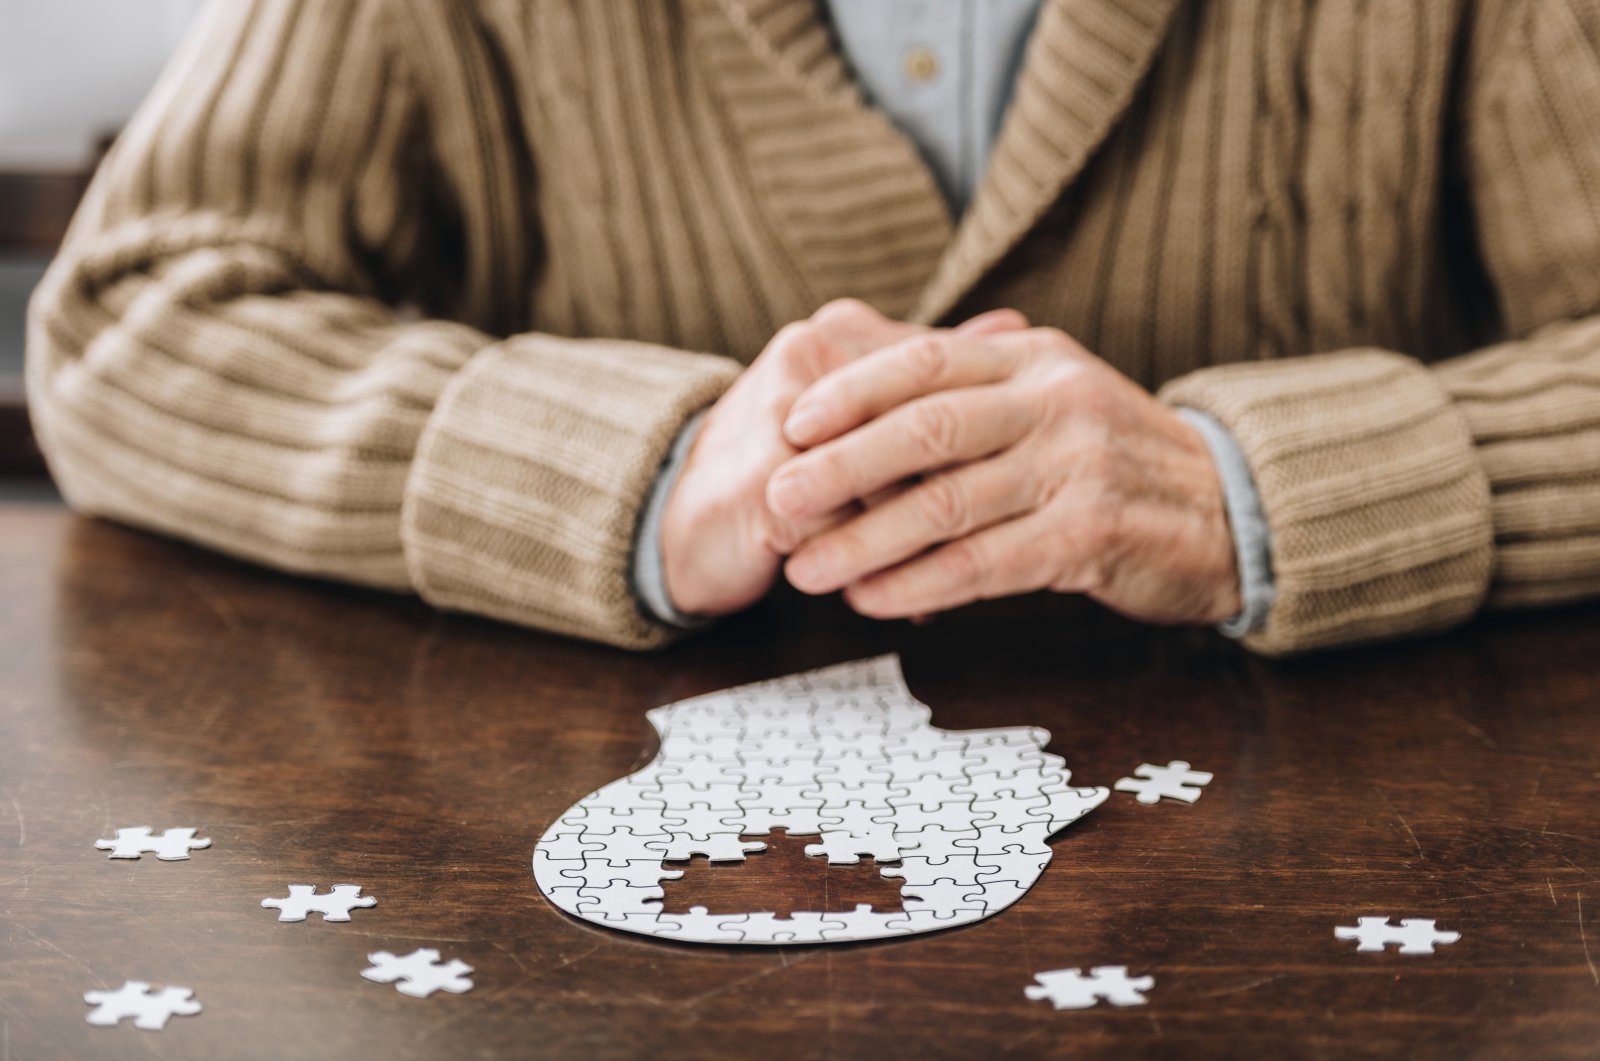 Senior man playing with puzzles on a table, in this undated file photo. (Shutterstock File Photo)